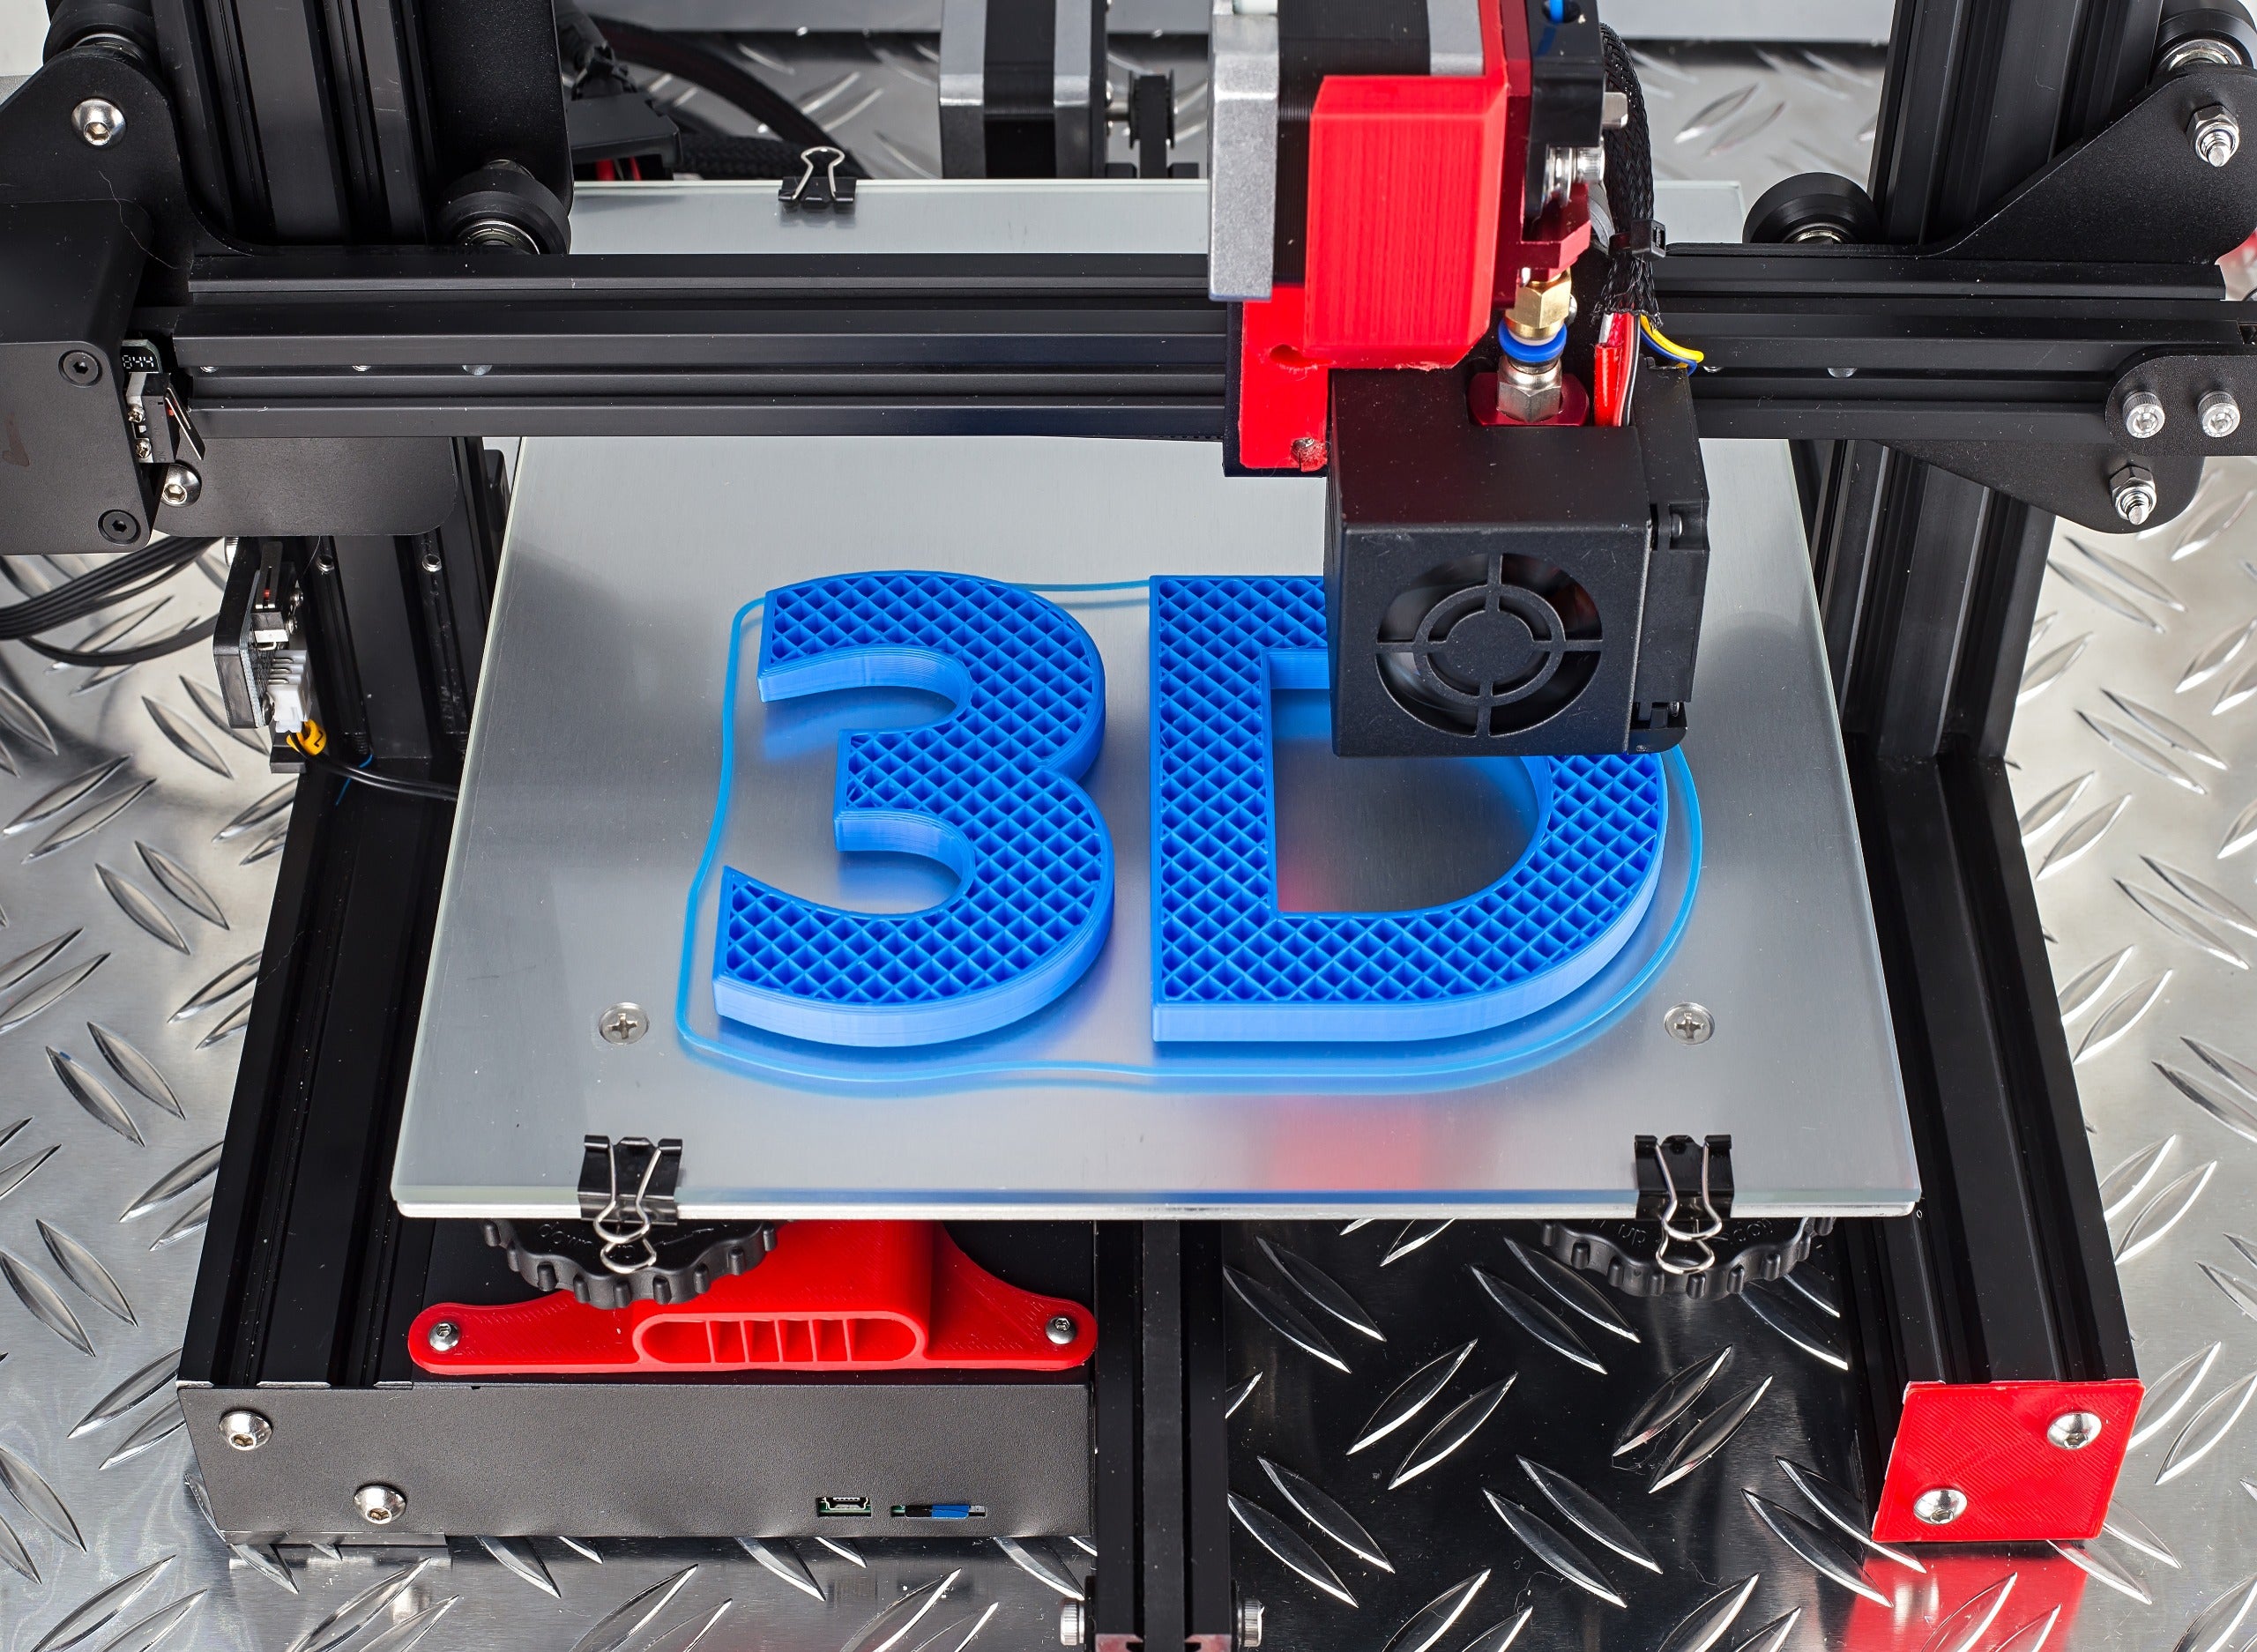 Accelerating Product Development with 3D Printing